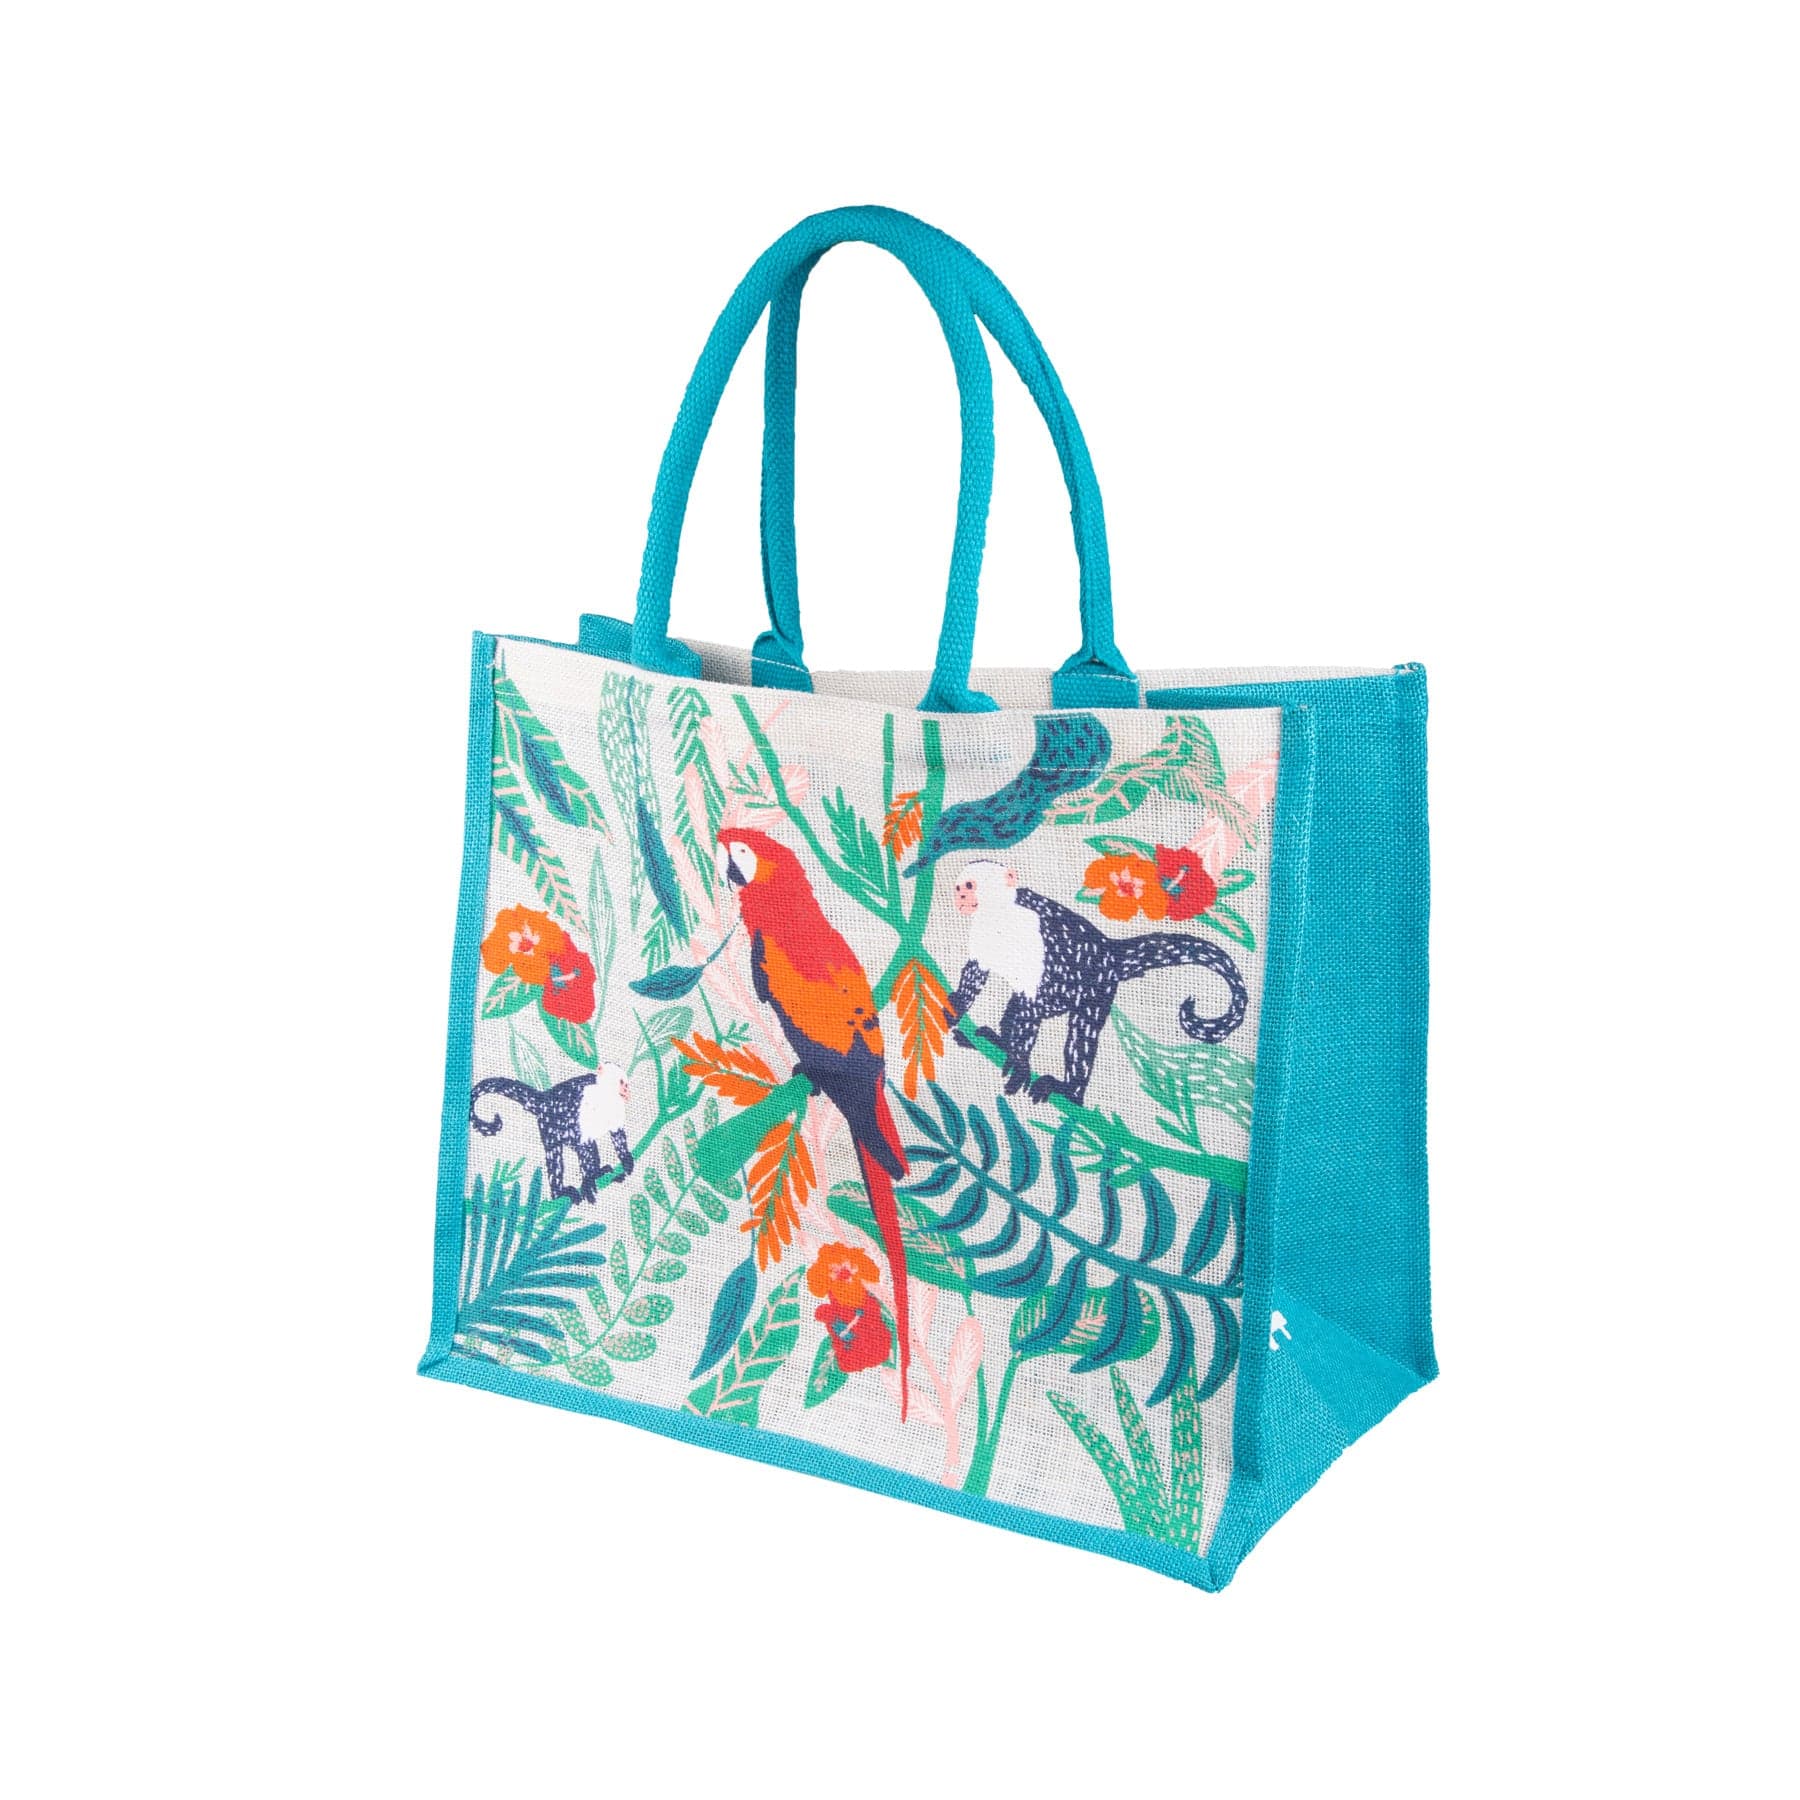 Colorful tropical tote bag with parrot and leopard print design on white background